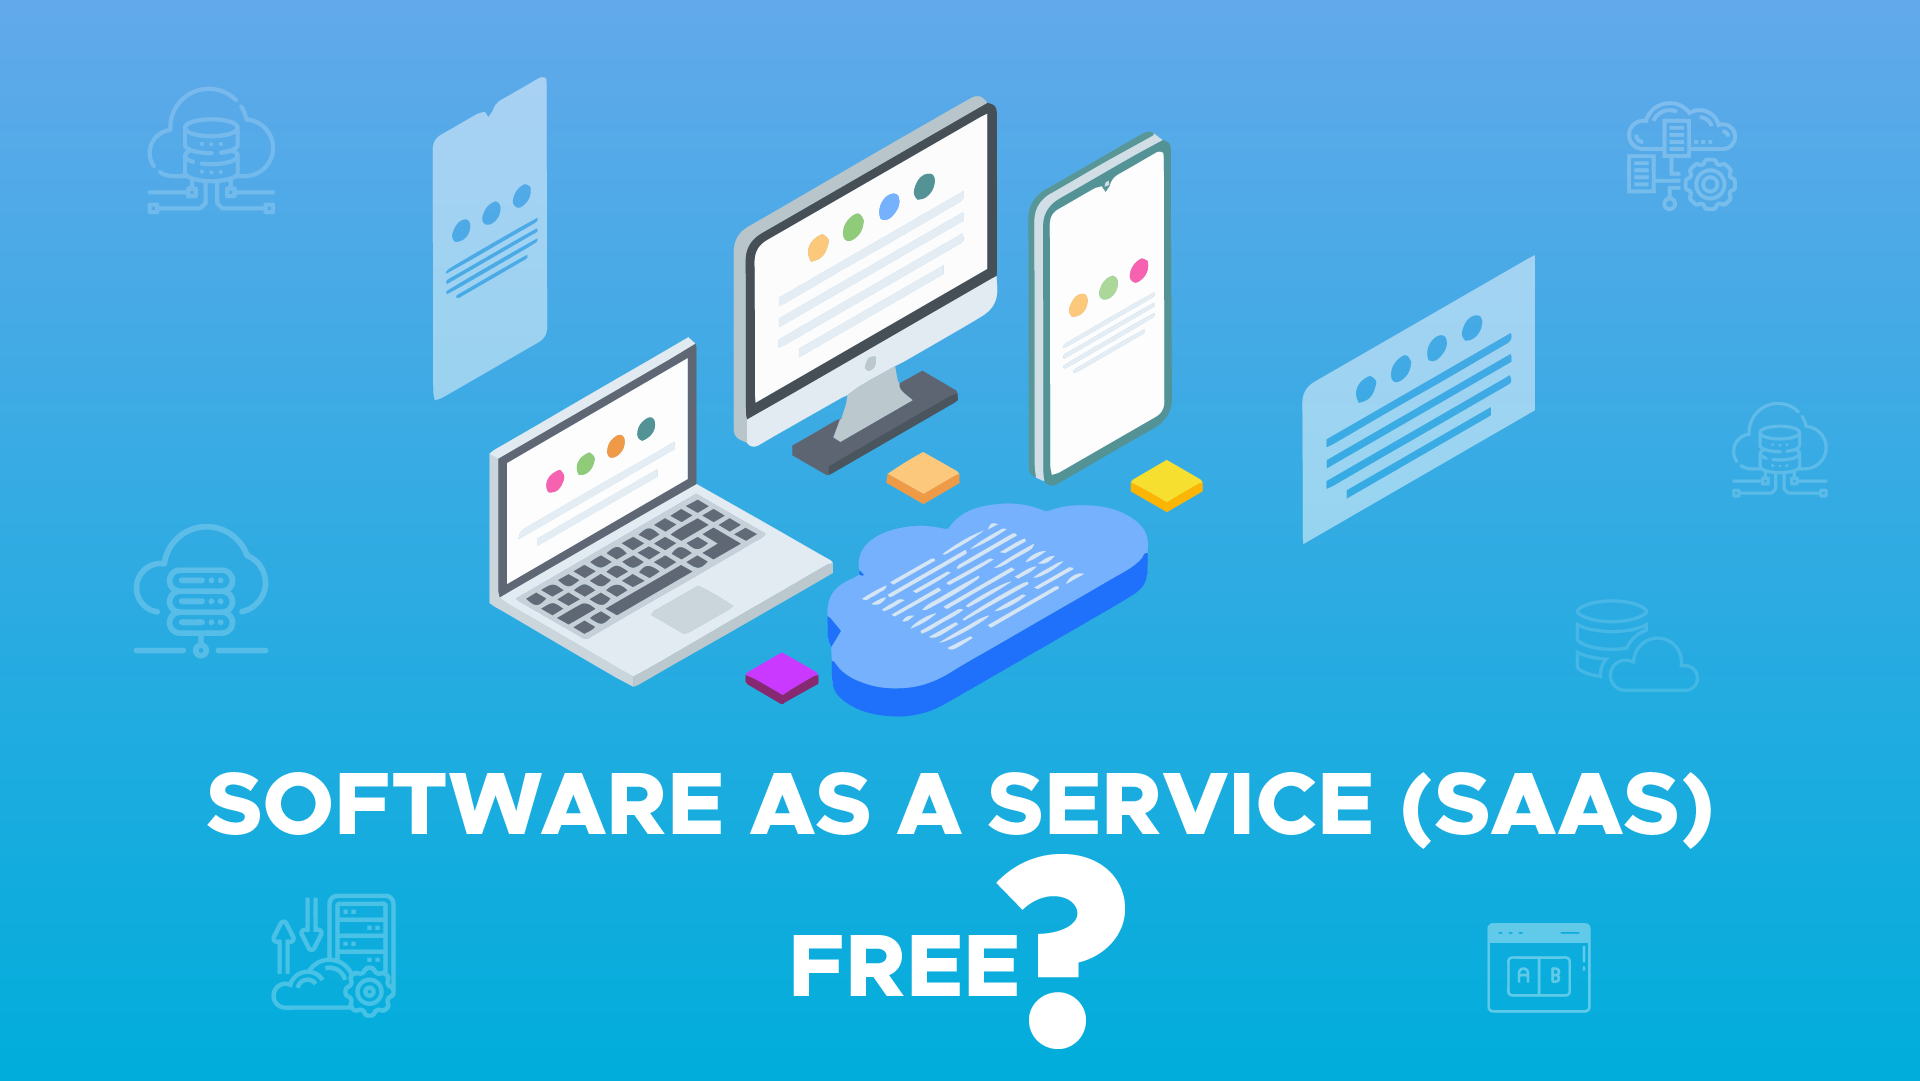 Why Some SaaS Products Are Free